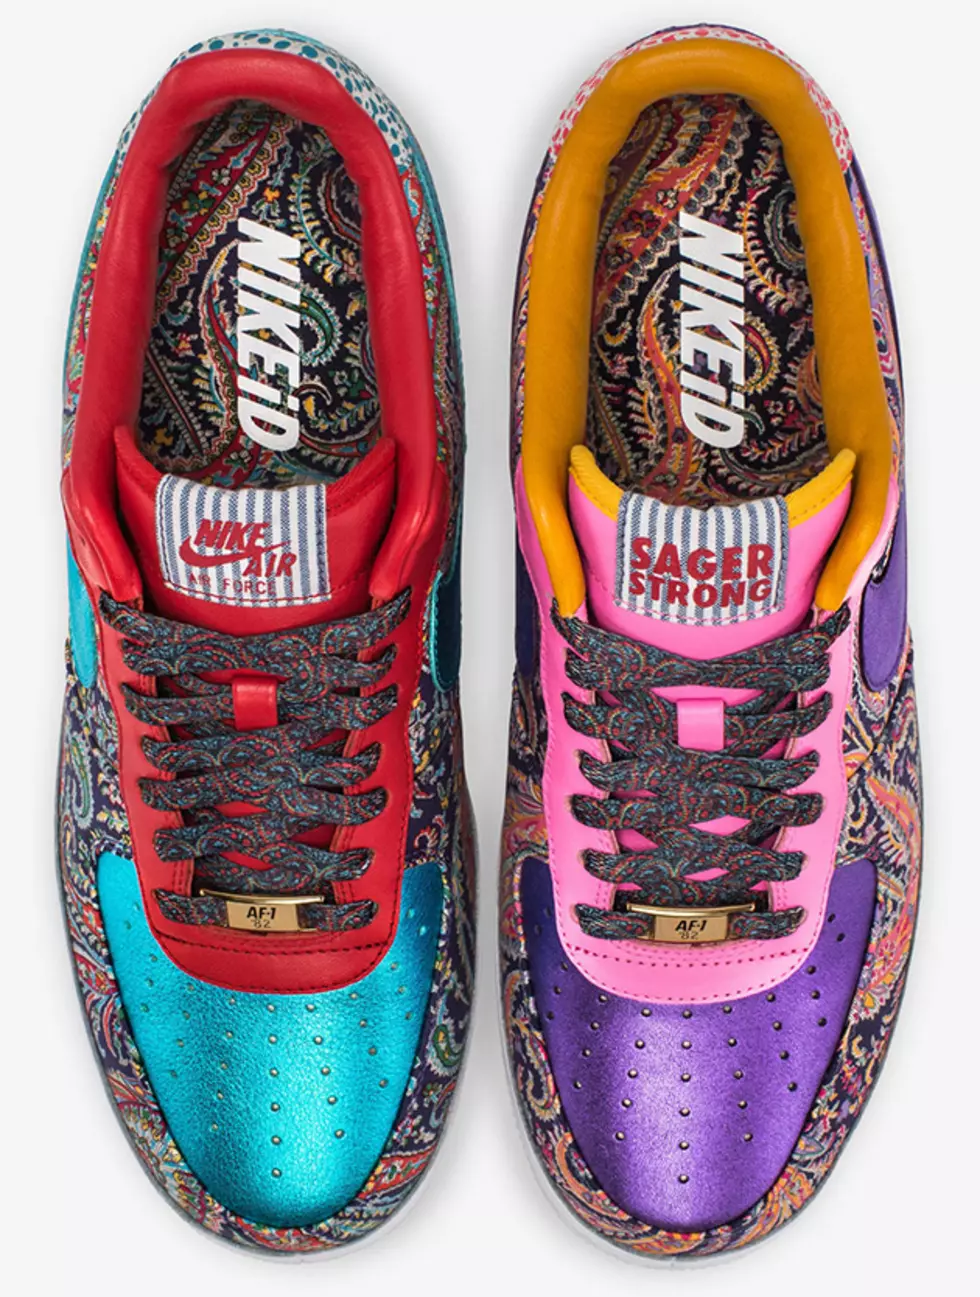 Craig Sager x Nike AIr Force 1 For Charity